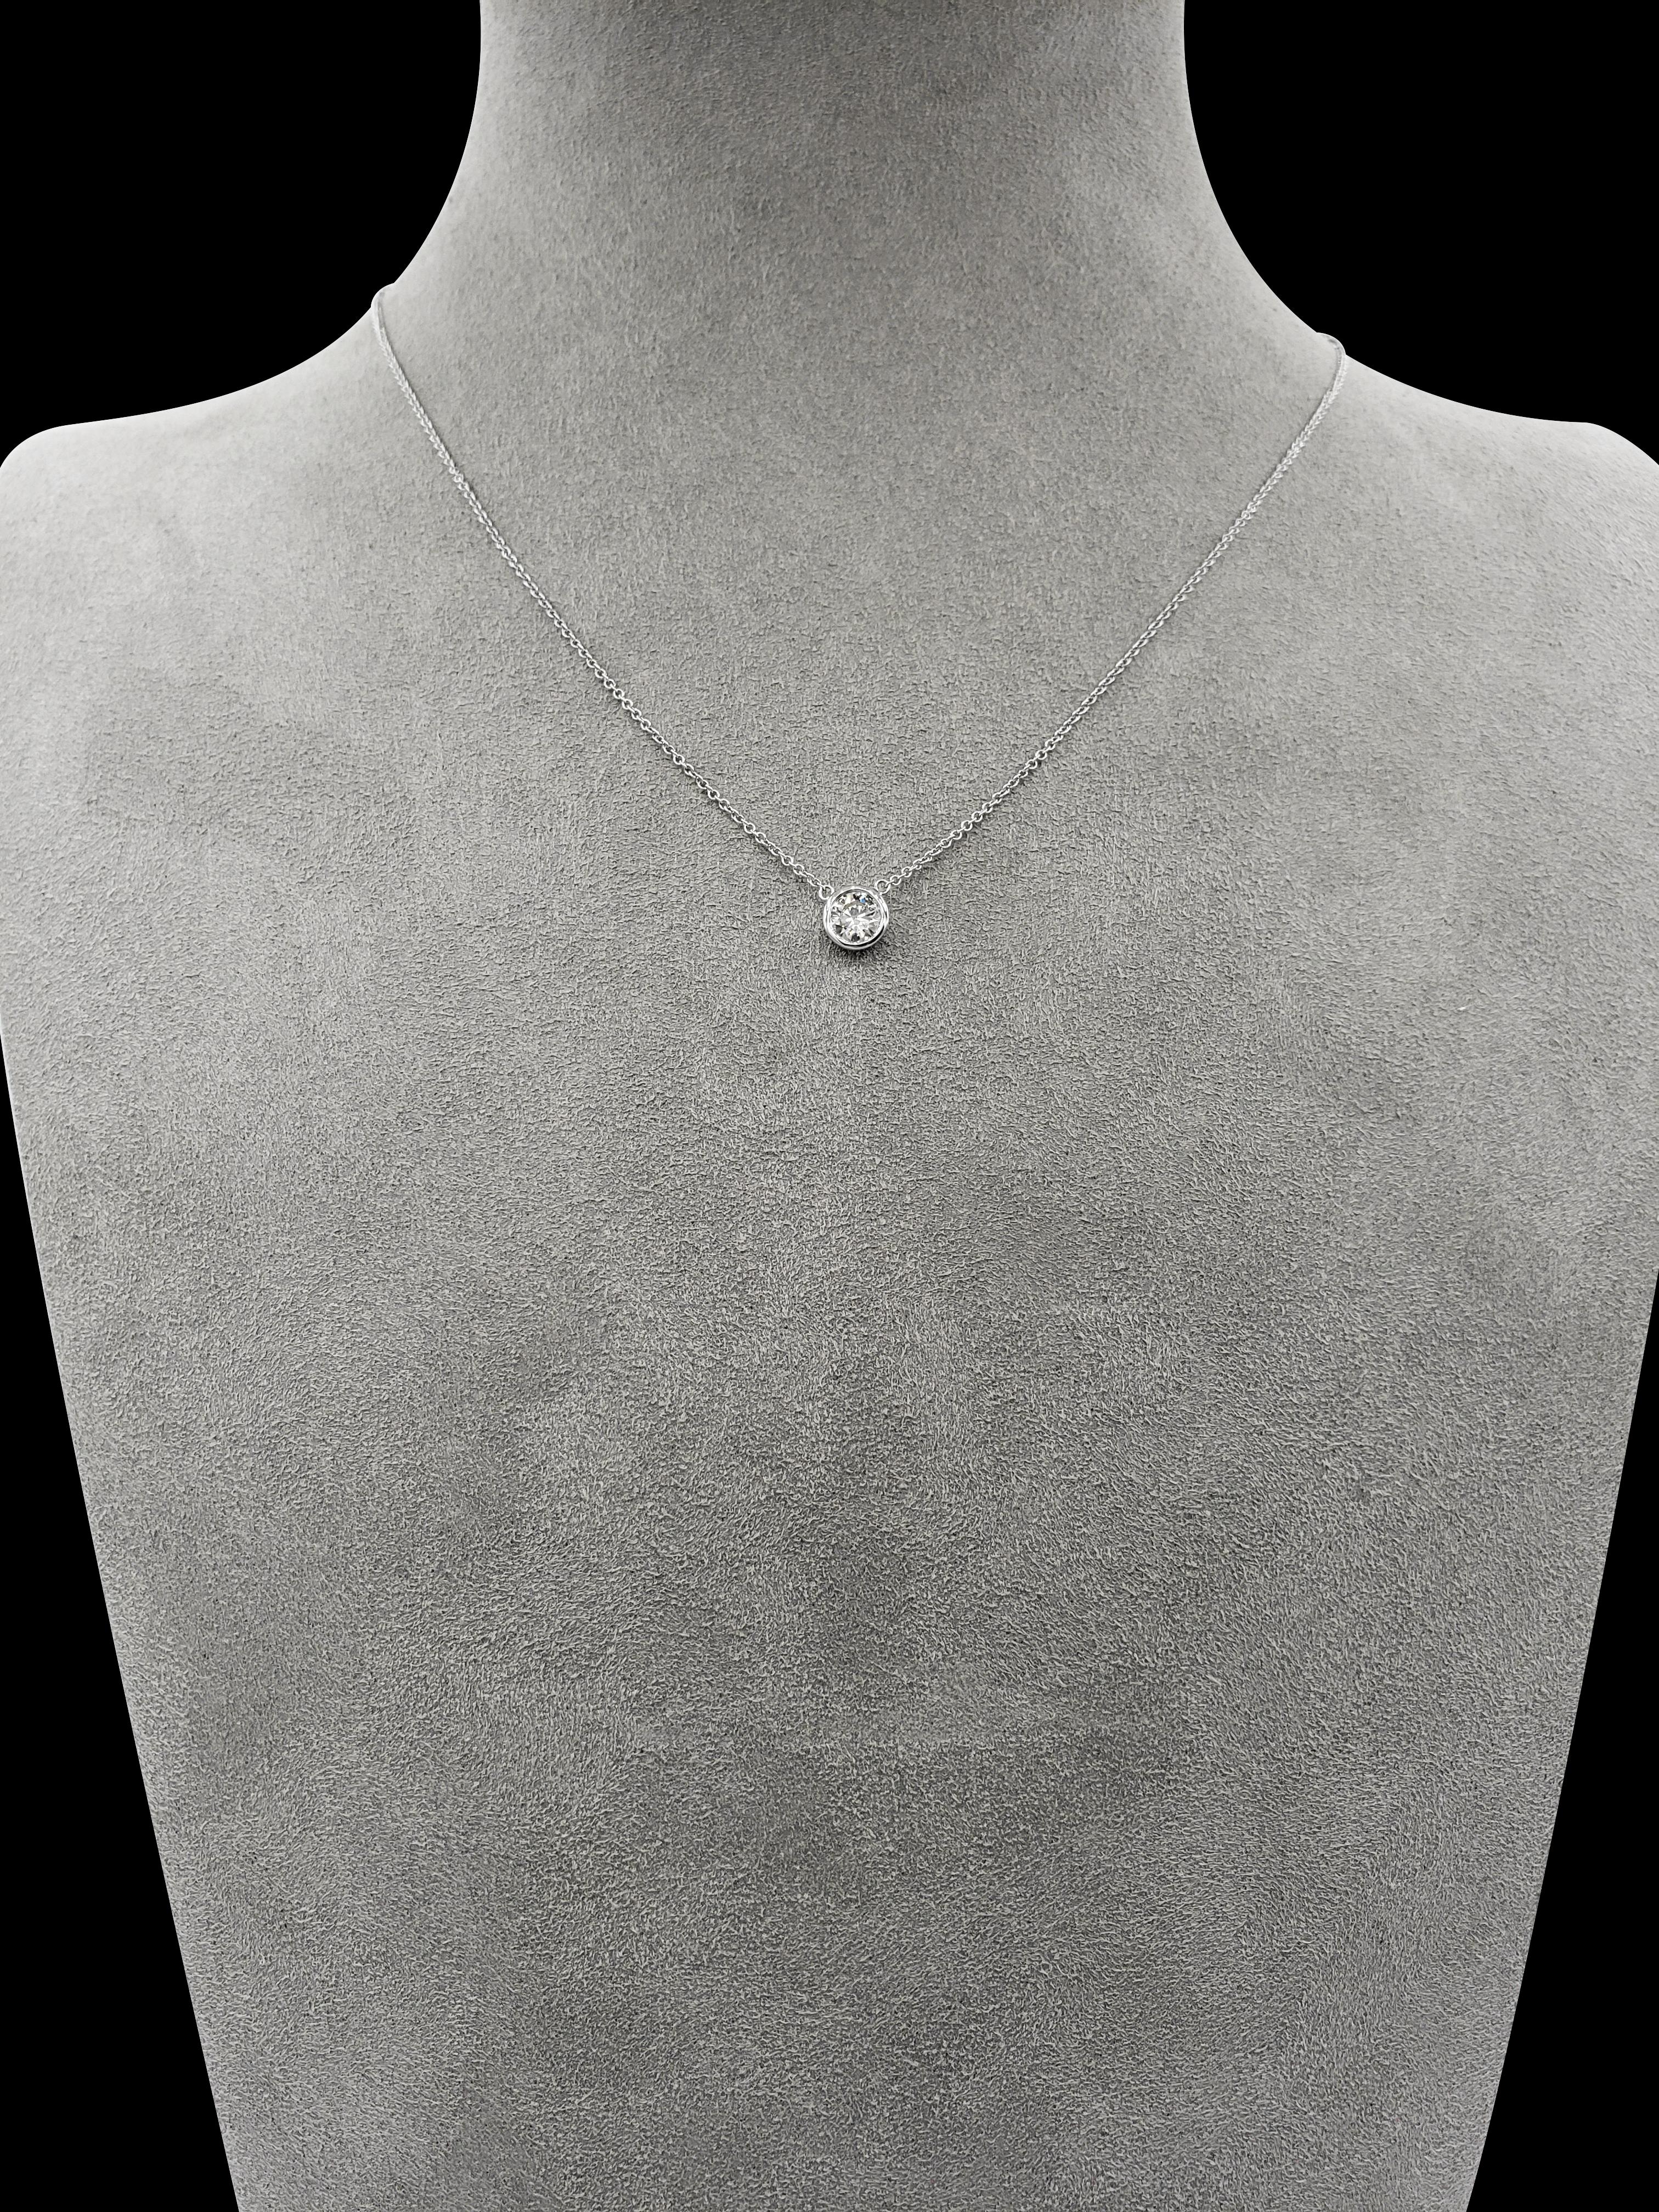 A simple and versatile solitaire pendant necklace showcasing a single round diamond in a 14 karat white gold bezel. Diamond weigh 0.51 carats. Attached to a 16 inch white gold chain (Adjustable upon request).

Roman Malakov is a custom house,